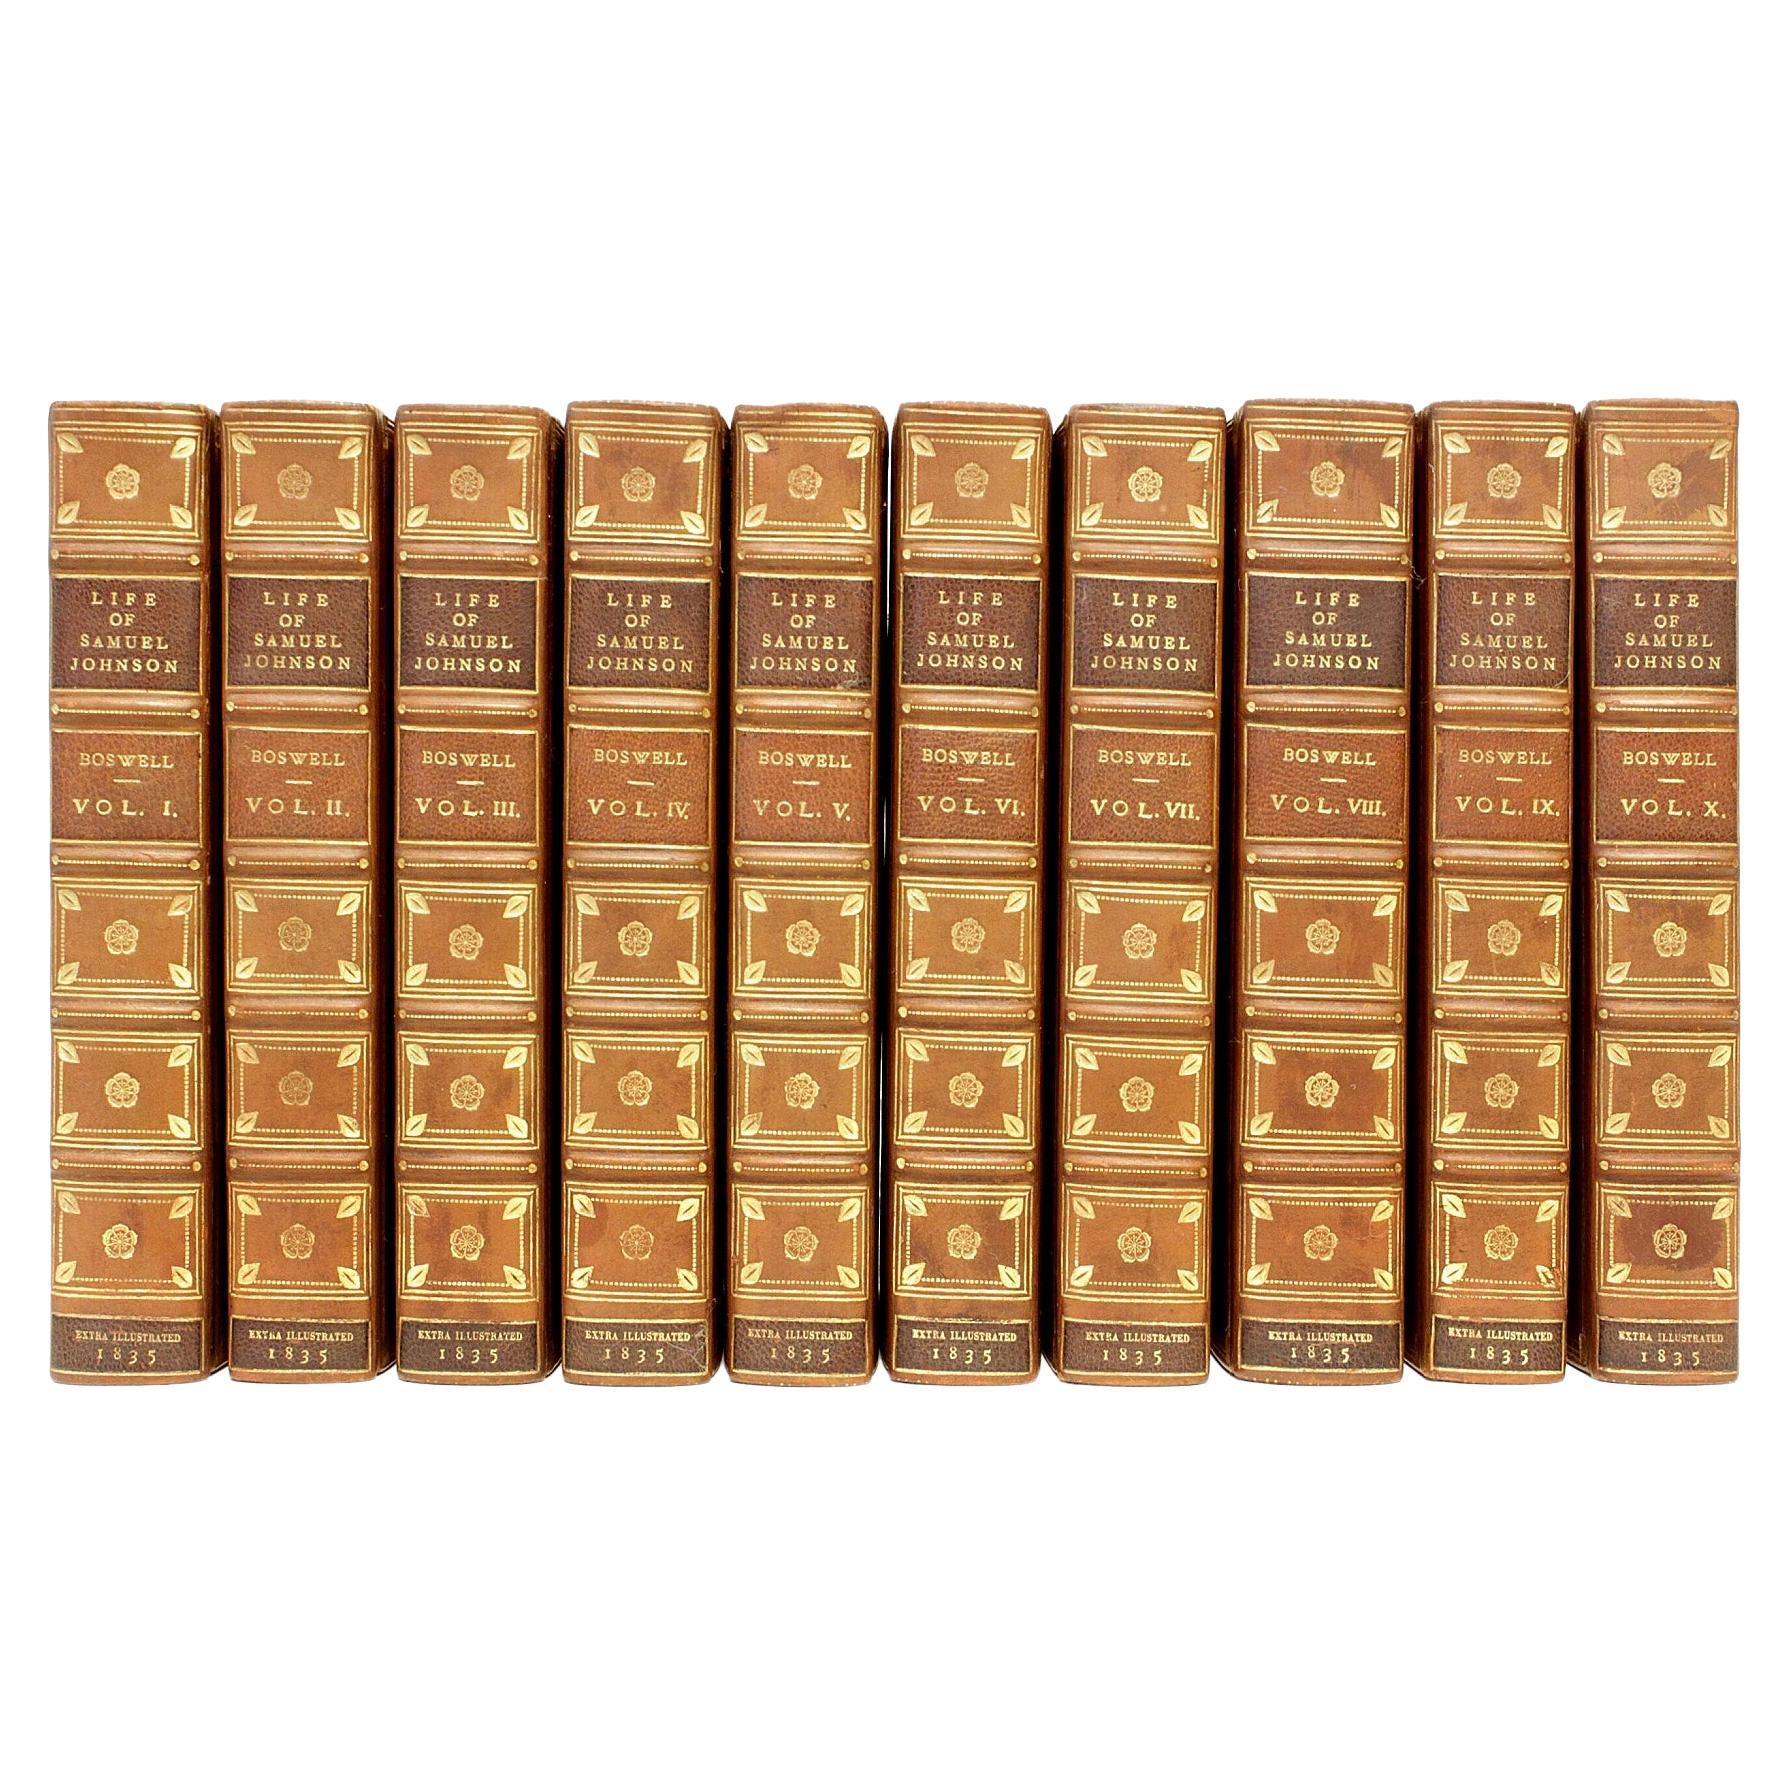 James Boswell, Life of Samuel Johnson, Extra Illustrated 10 Vols, reliure en cuir